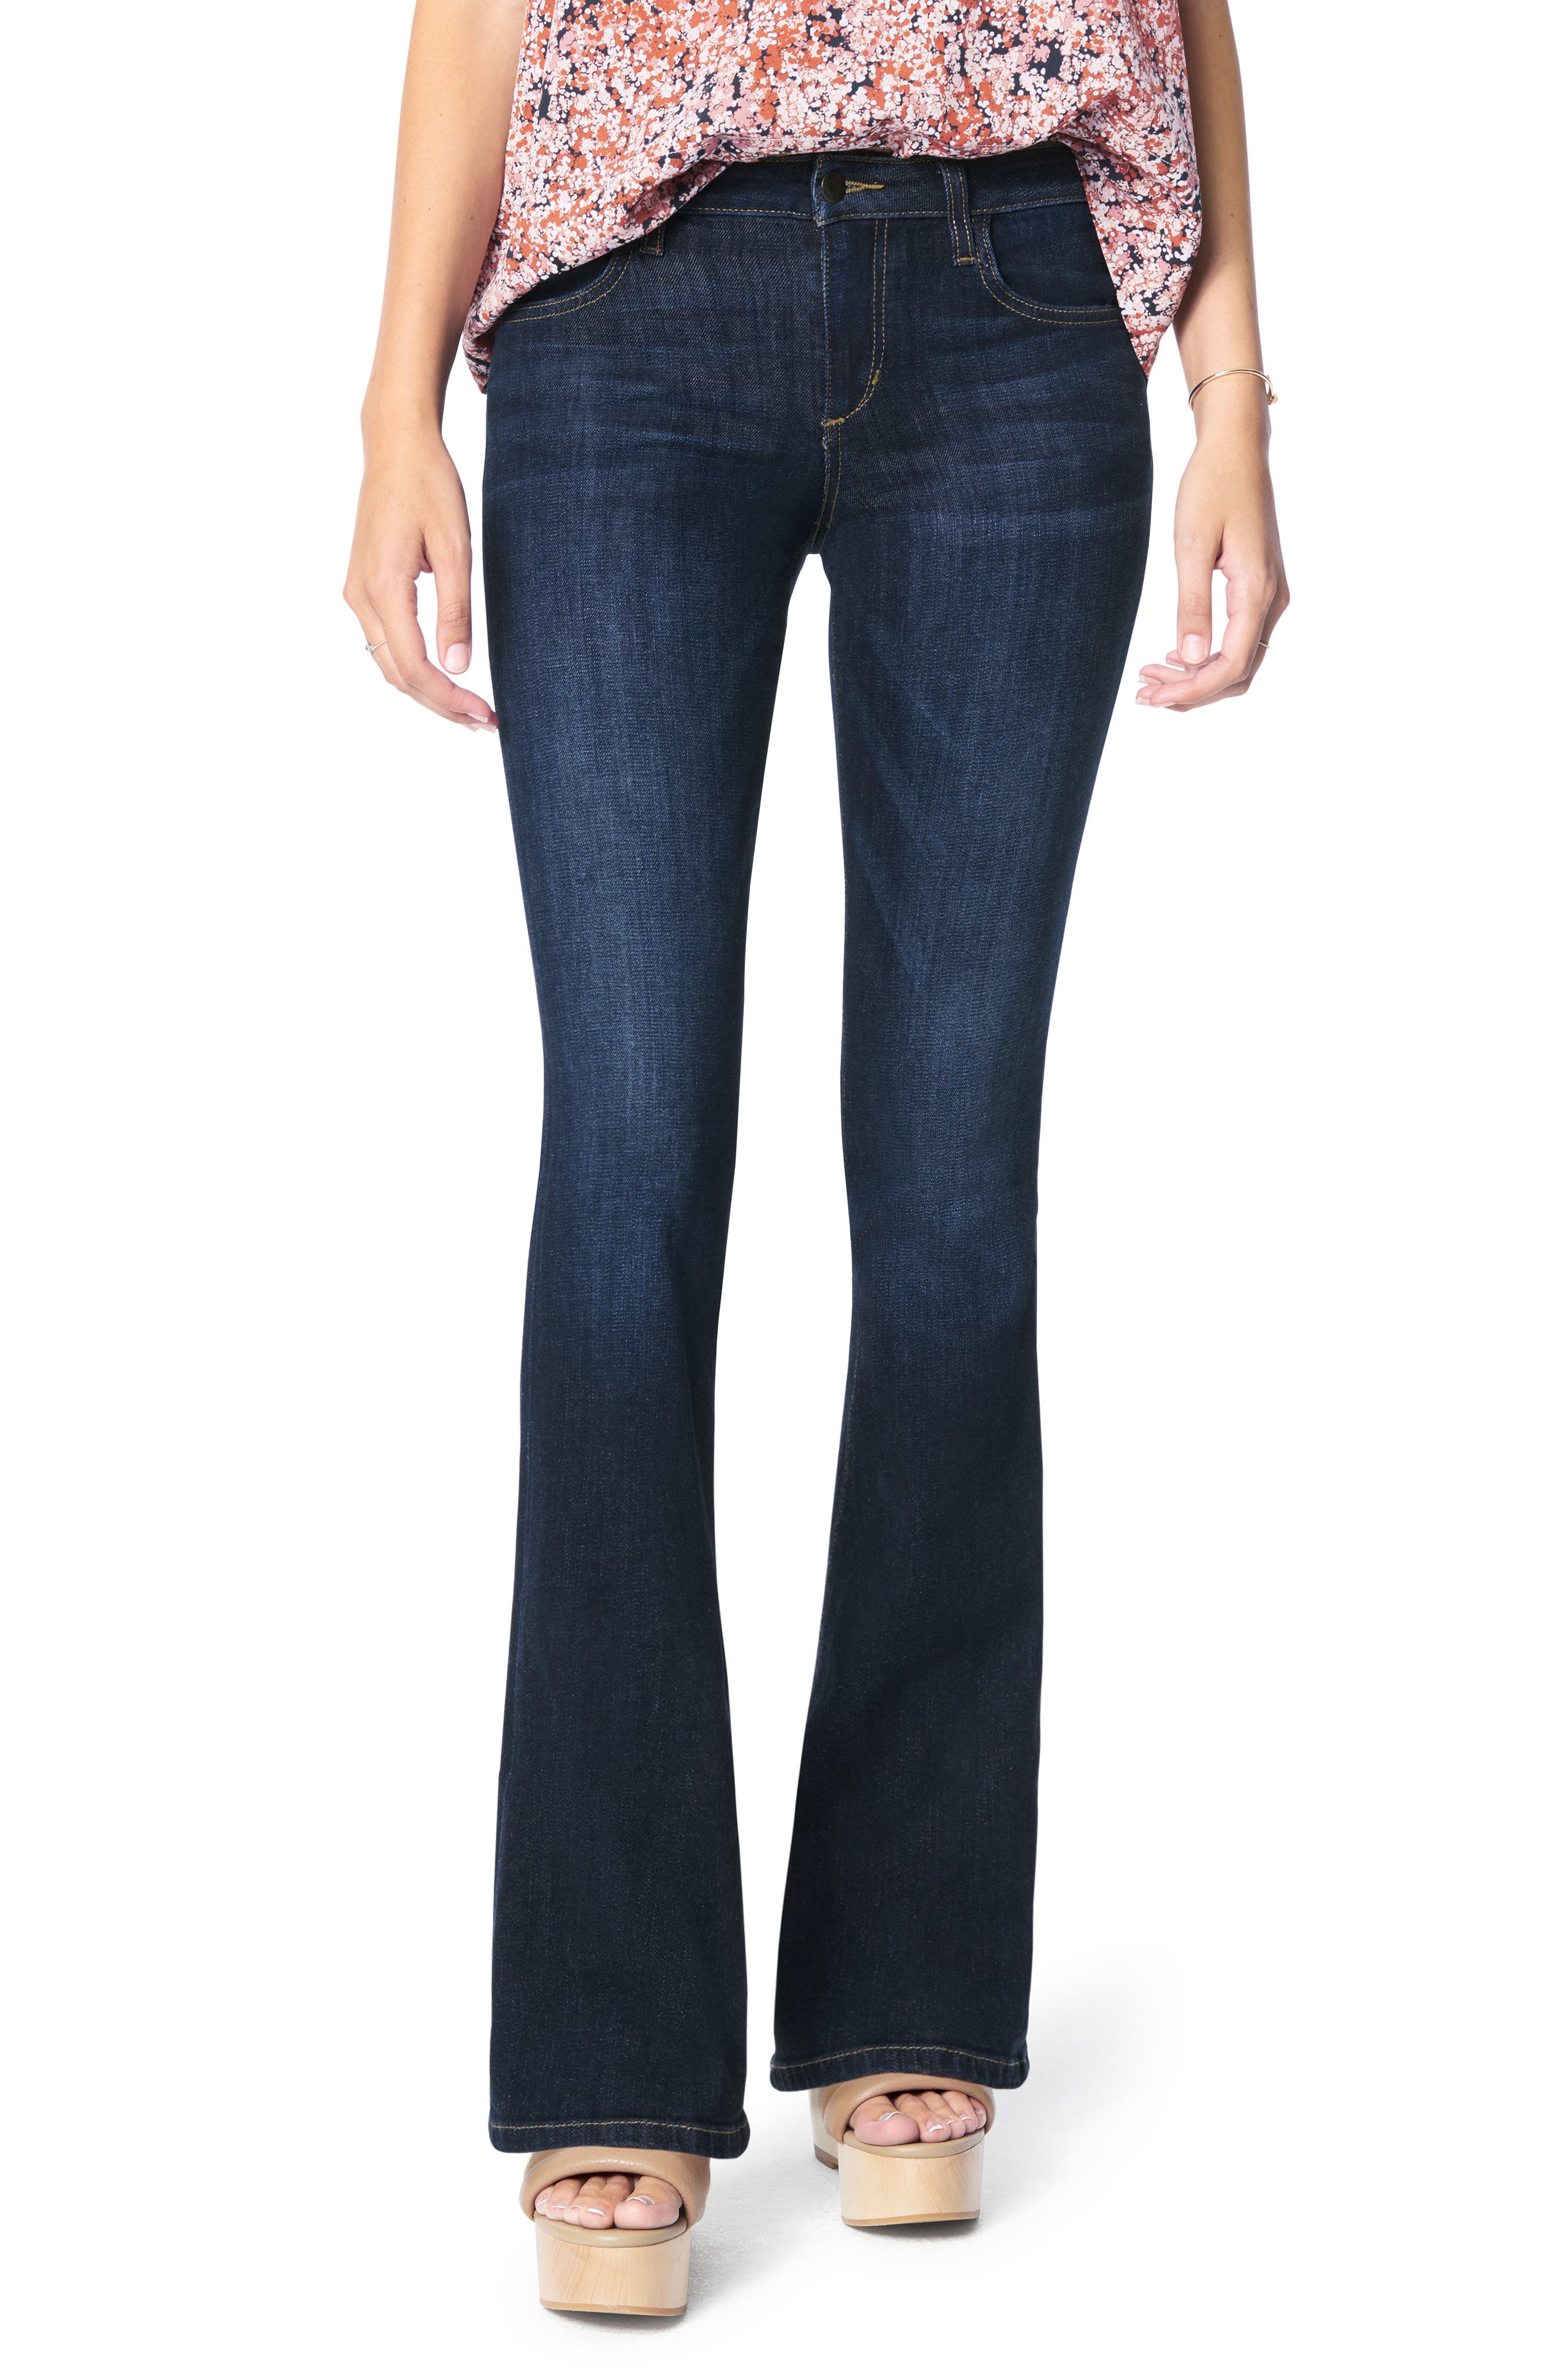 Flares JOES JEANS W26 Women Clothing Joes Jeans Women Jeans Joes Jeans Women Boot-cut Jeans T 34-36 Flares Joes Jeans Women Boot-cut Jeans blue Boot-cut Jeans Flares Joes Jeans Women 